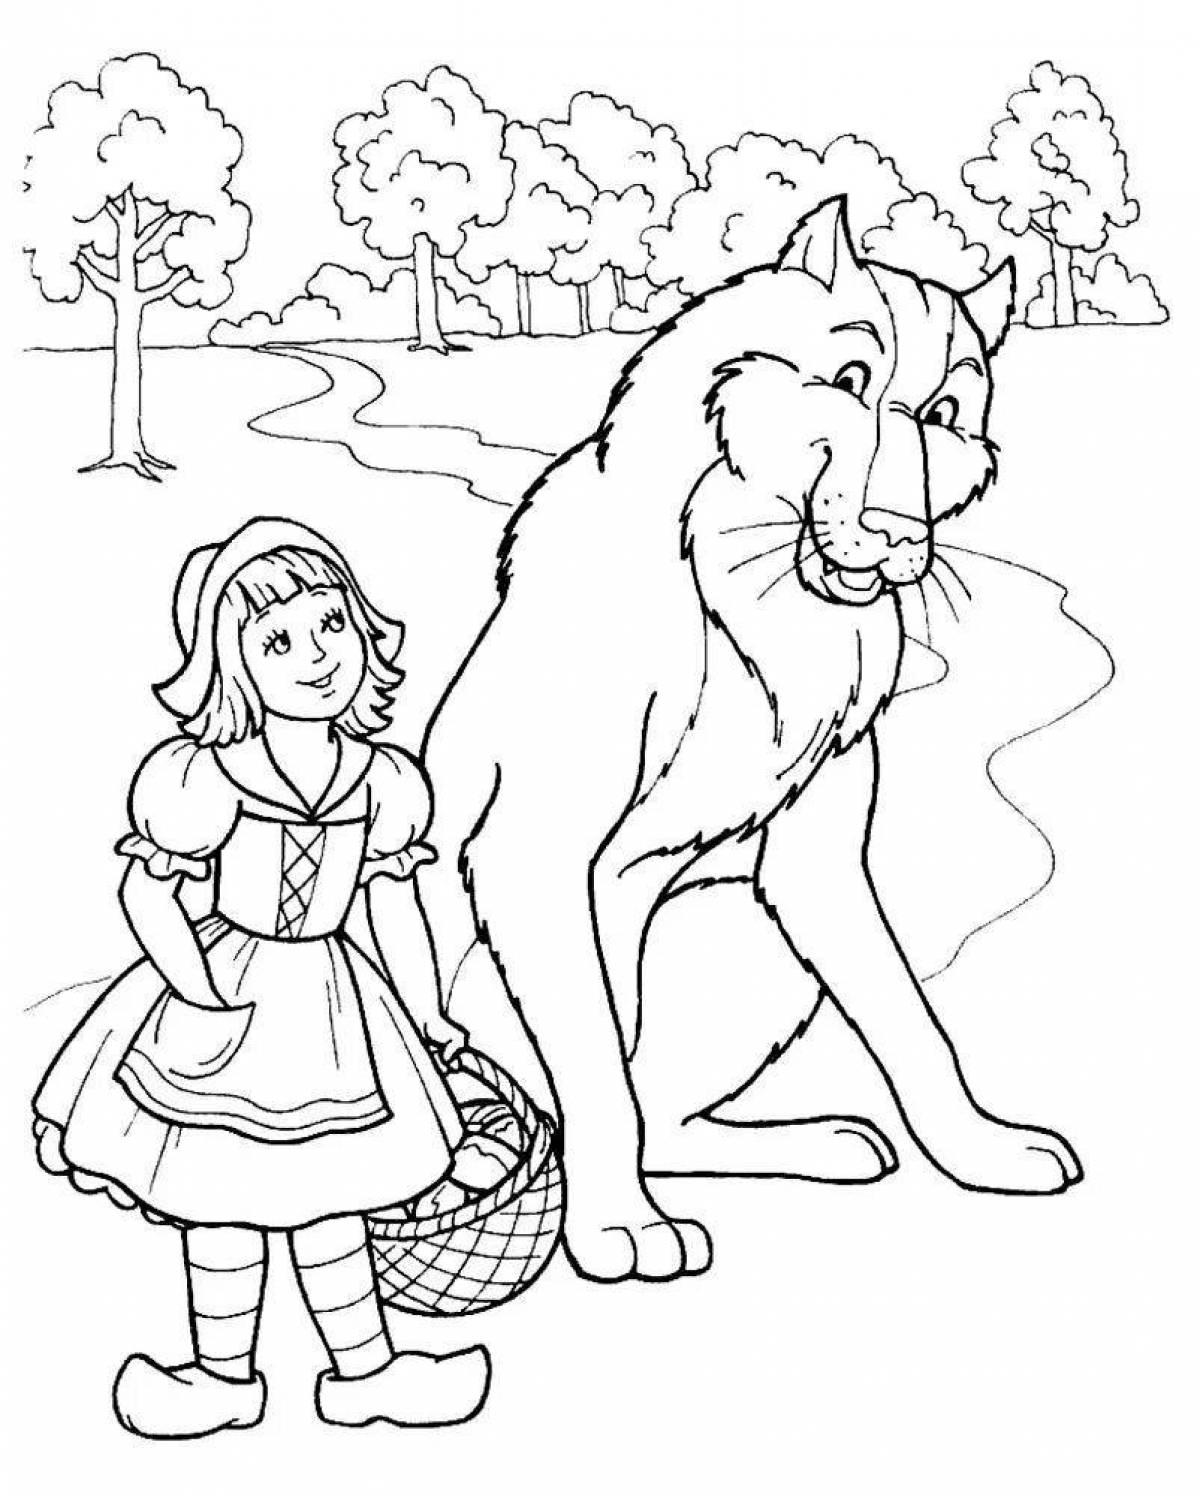 Amazing Perro's Tale Coloring Page for Preschoolers